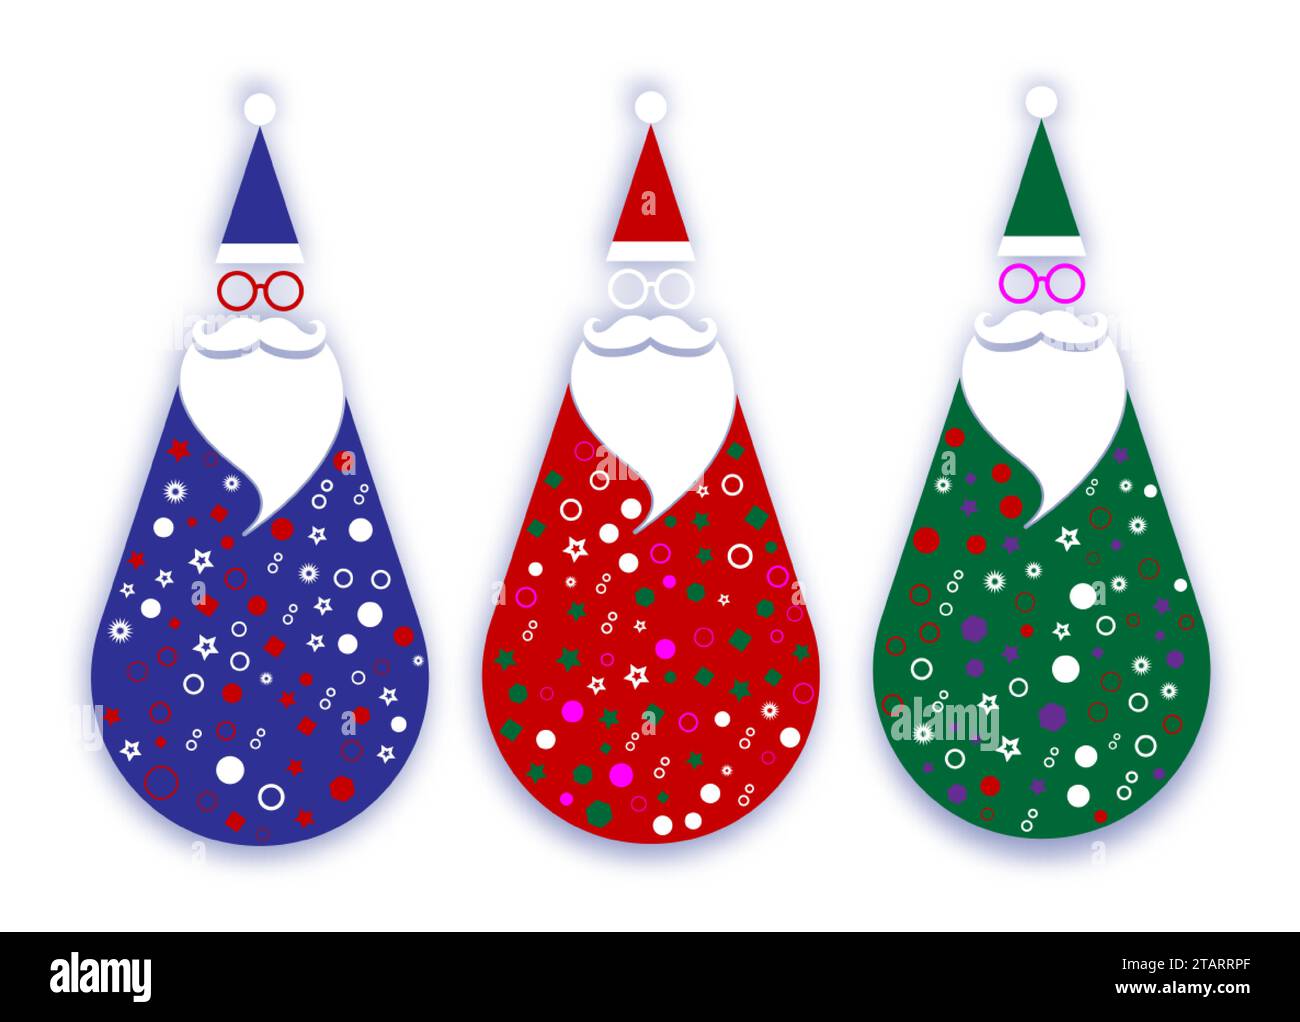 Santa Claus Christmas fashion hipster style set icons. Colorful Santa hats, moustache and beards, glasses. Xmas tilting toys for your festive design Stock Vector